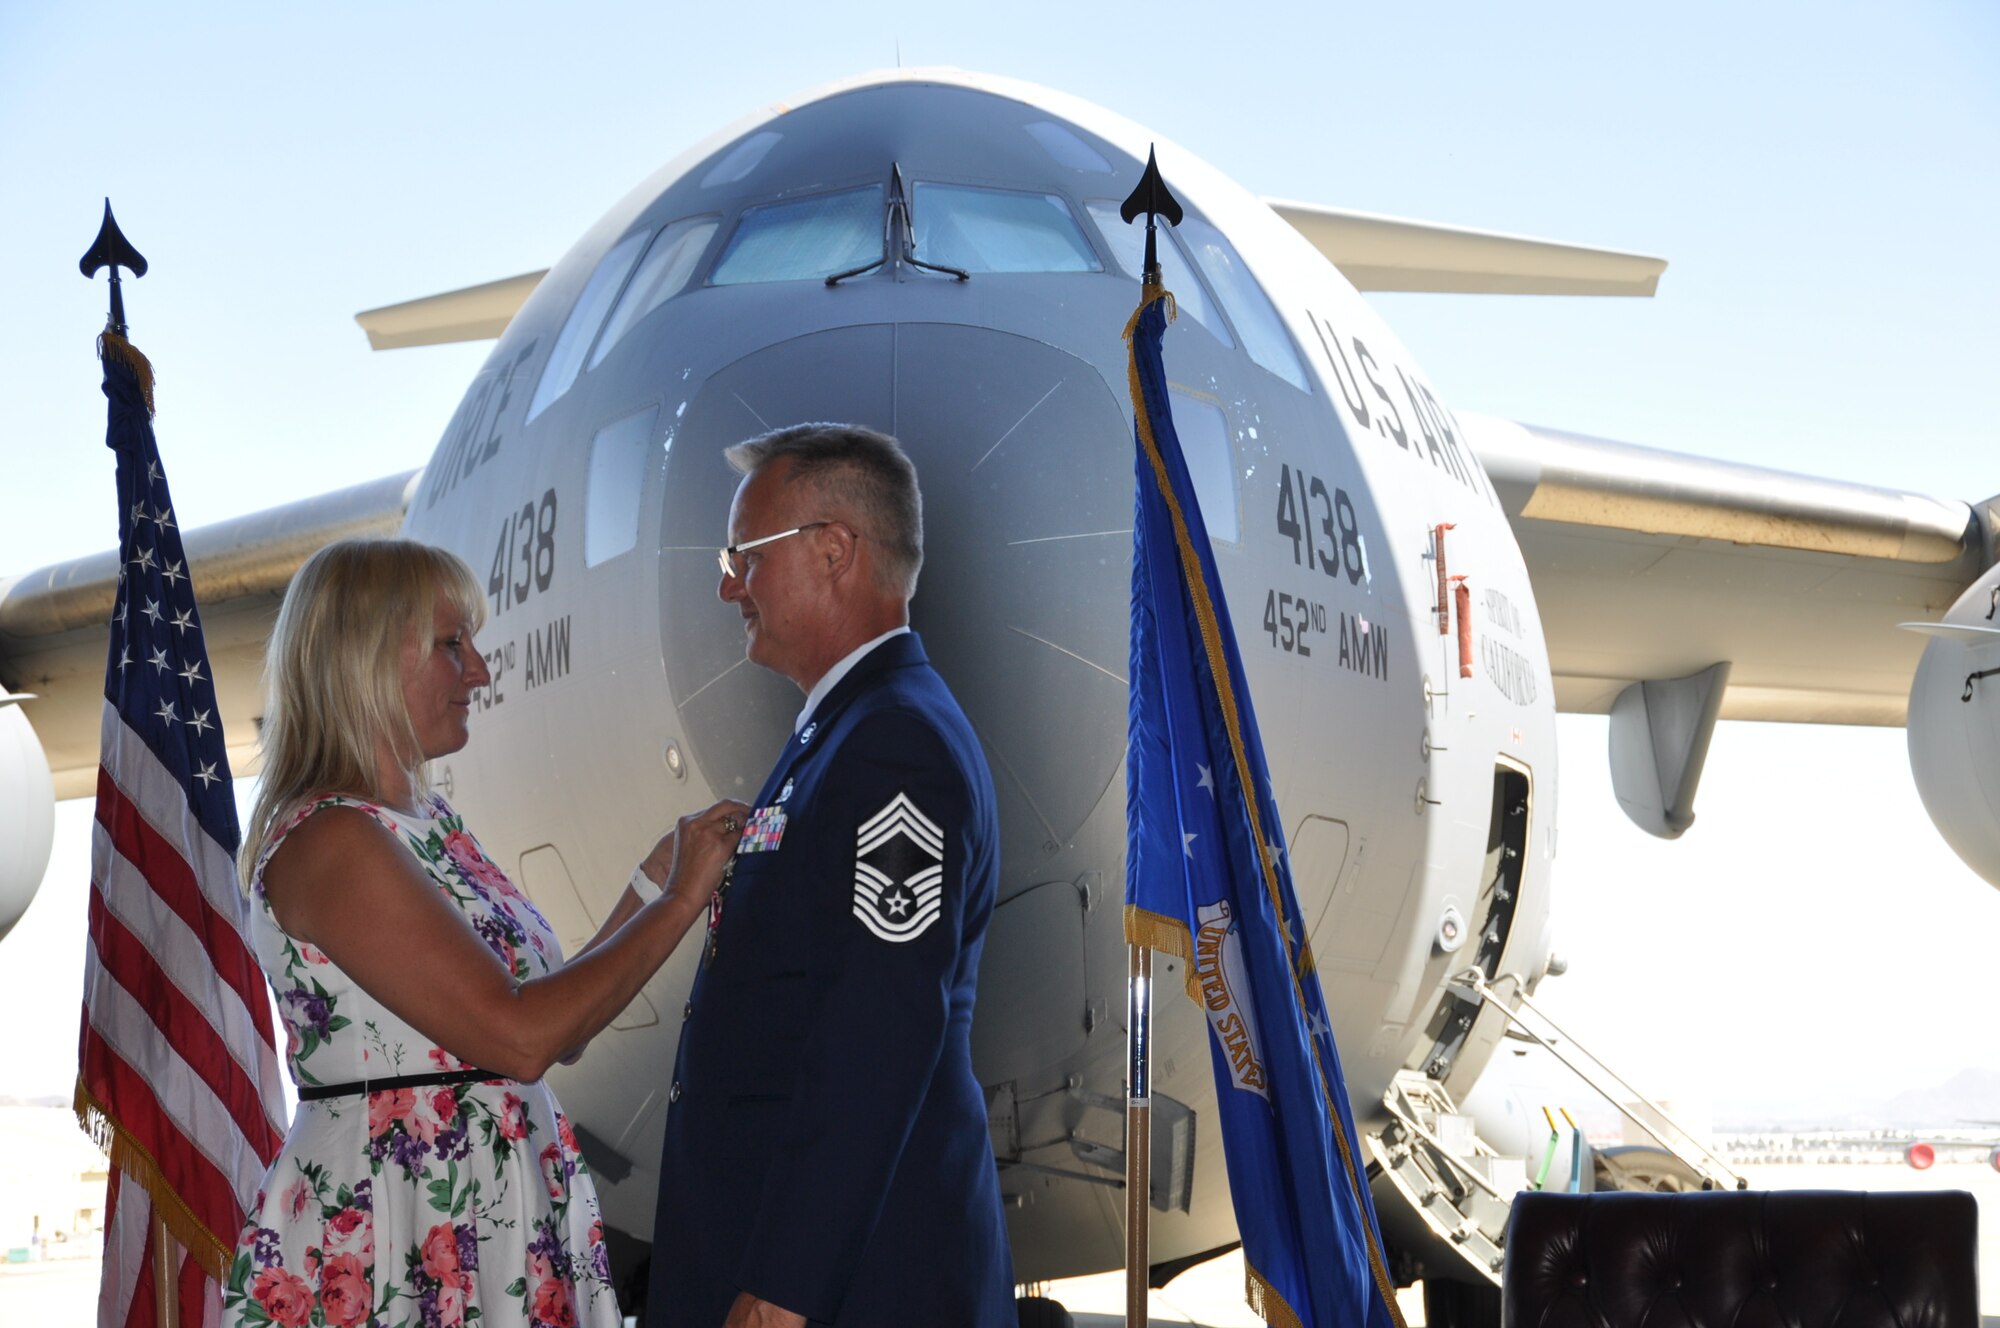 After completing more than 37 years of faithful service to his country, 452nd Aircraft Maintenance Squadron Superintendent, Chief Master Sgt. James L. Madsen, officially retired Saturday, July 27, 2019. Madsen’s retirement ceremony took place in March Field’s “Pride Hangar,” and was very-well attended, which considering the soaring afternoon temperatures, proved a fine indication of the esteem with which the chief is held.